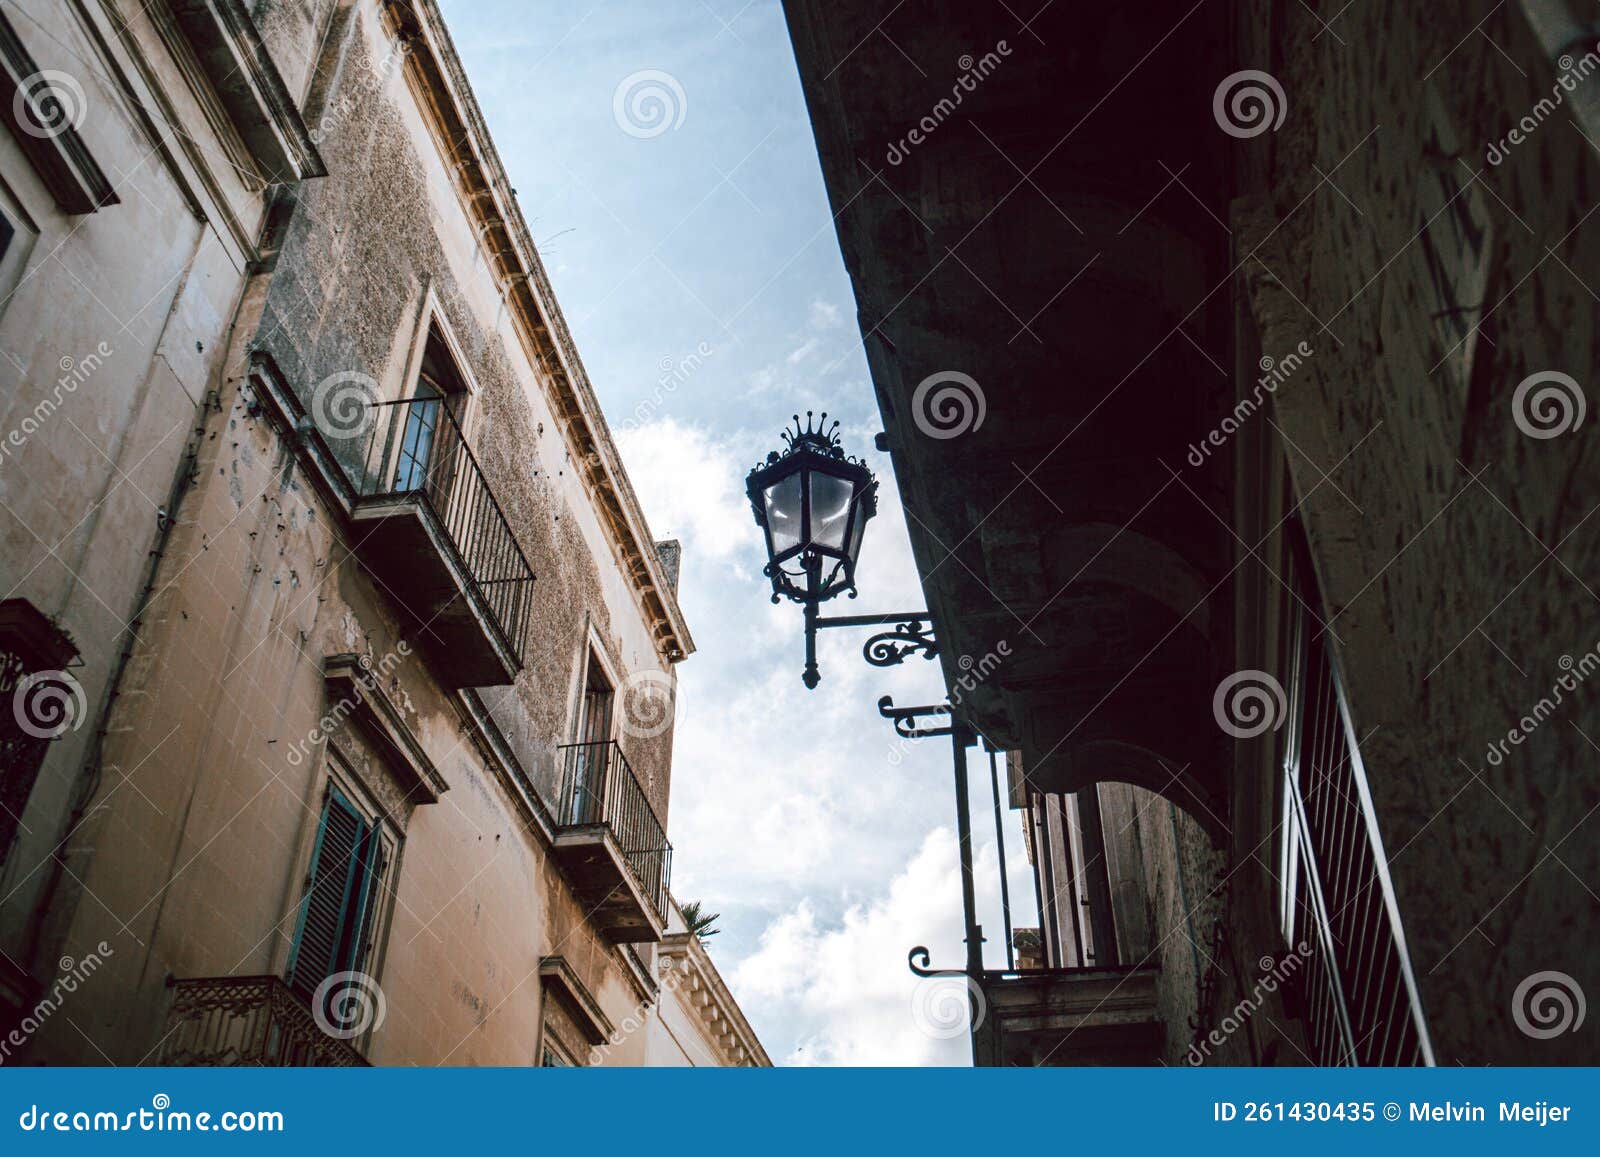 a street lamp with a crown on a wall in lecce with clear blue skies, italy